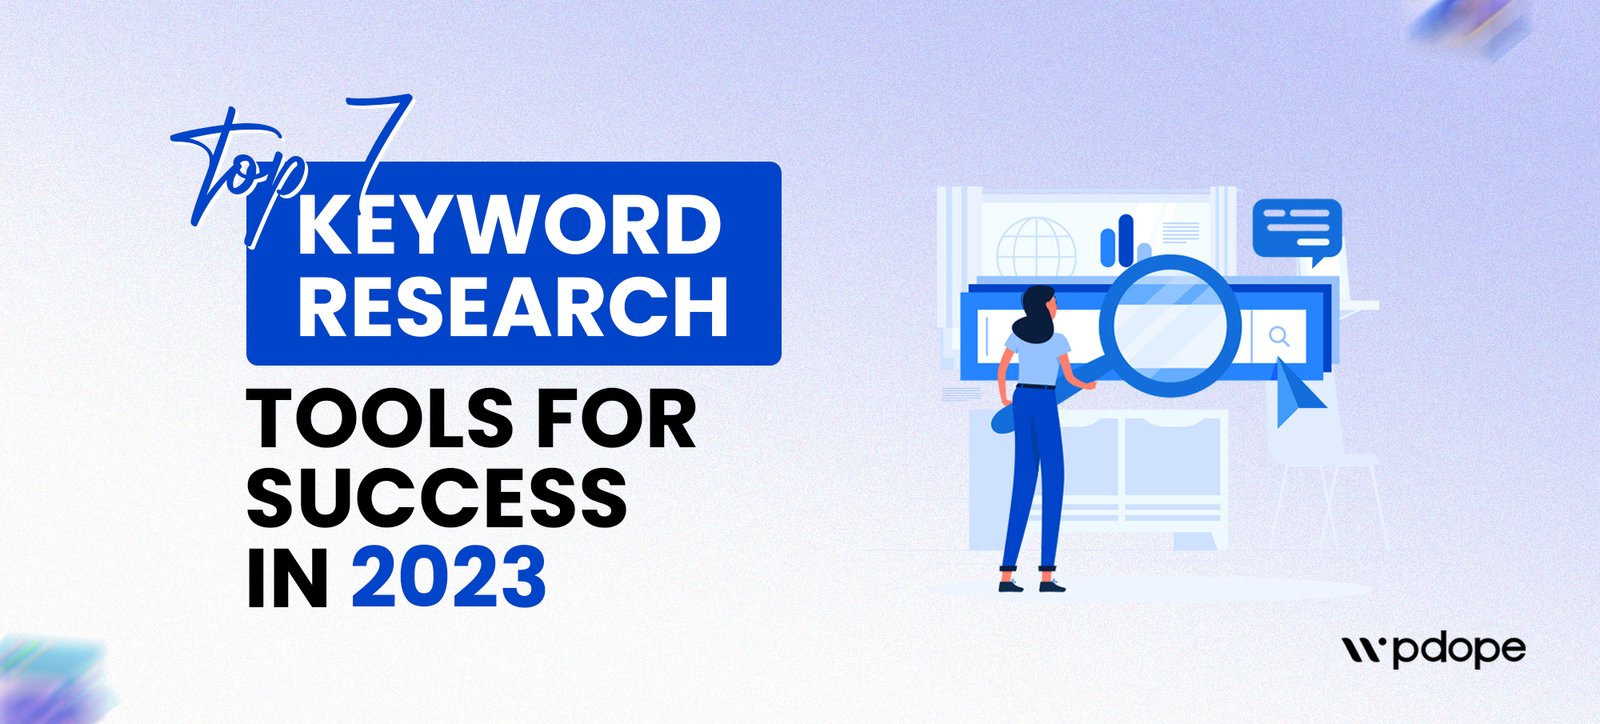 Top 7 Keyword Research Tools for Success in 2023